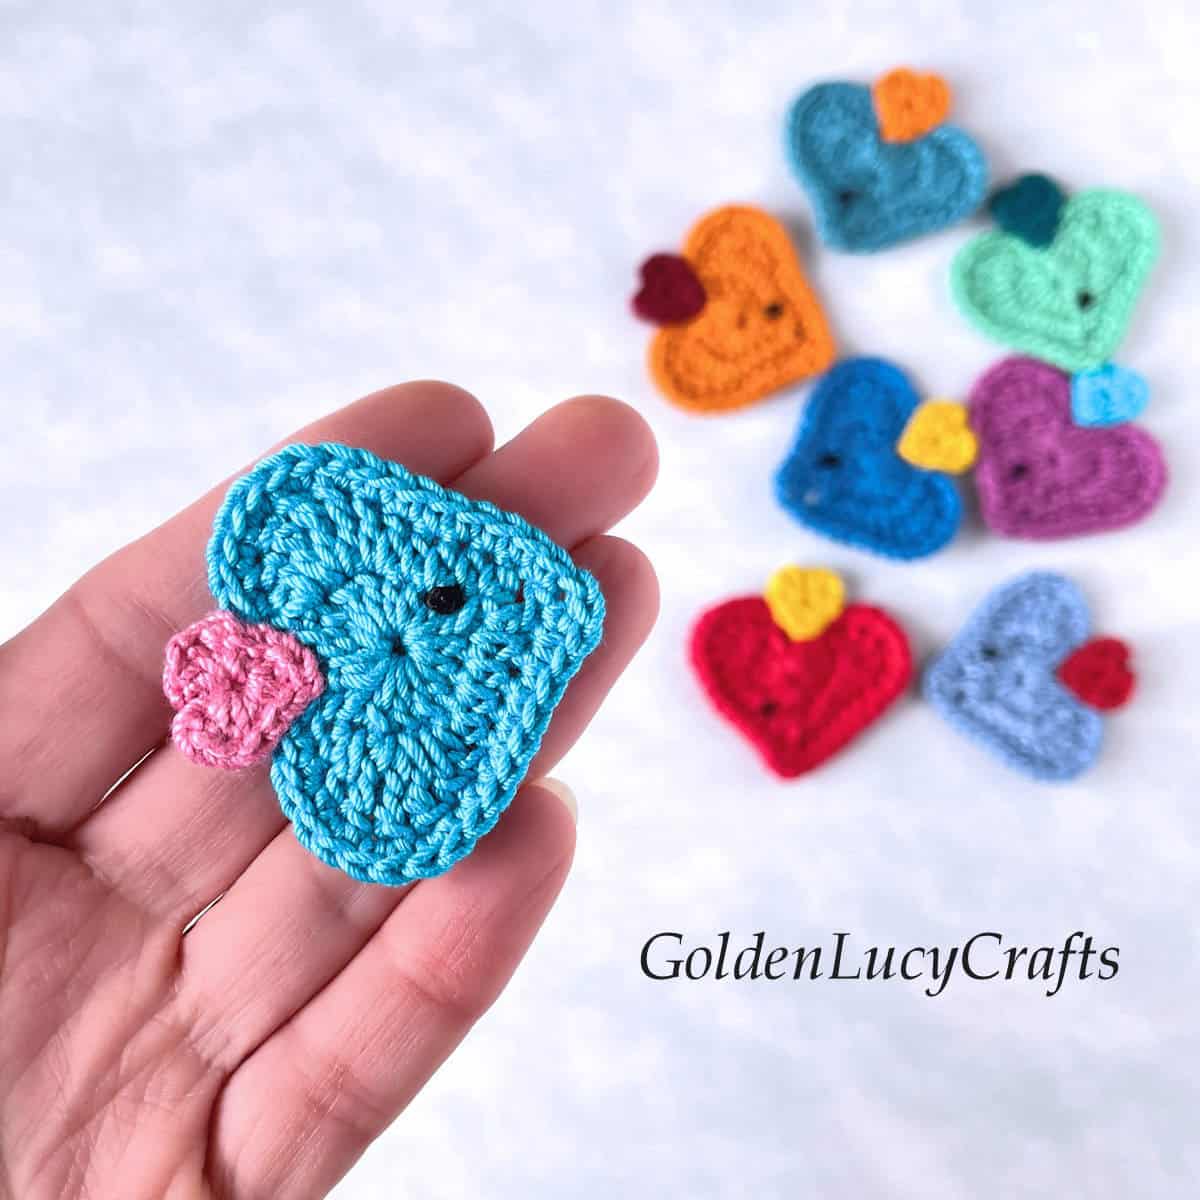 Crochet heart fish applique in the palm of a hand.